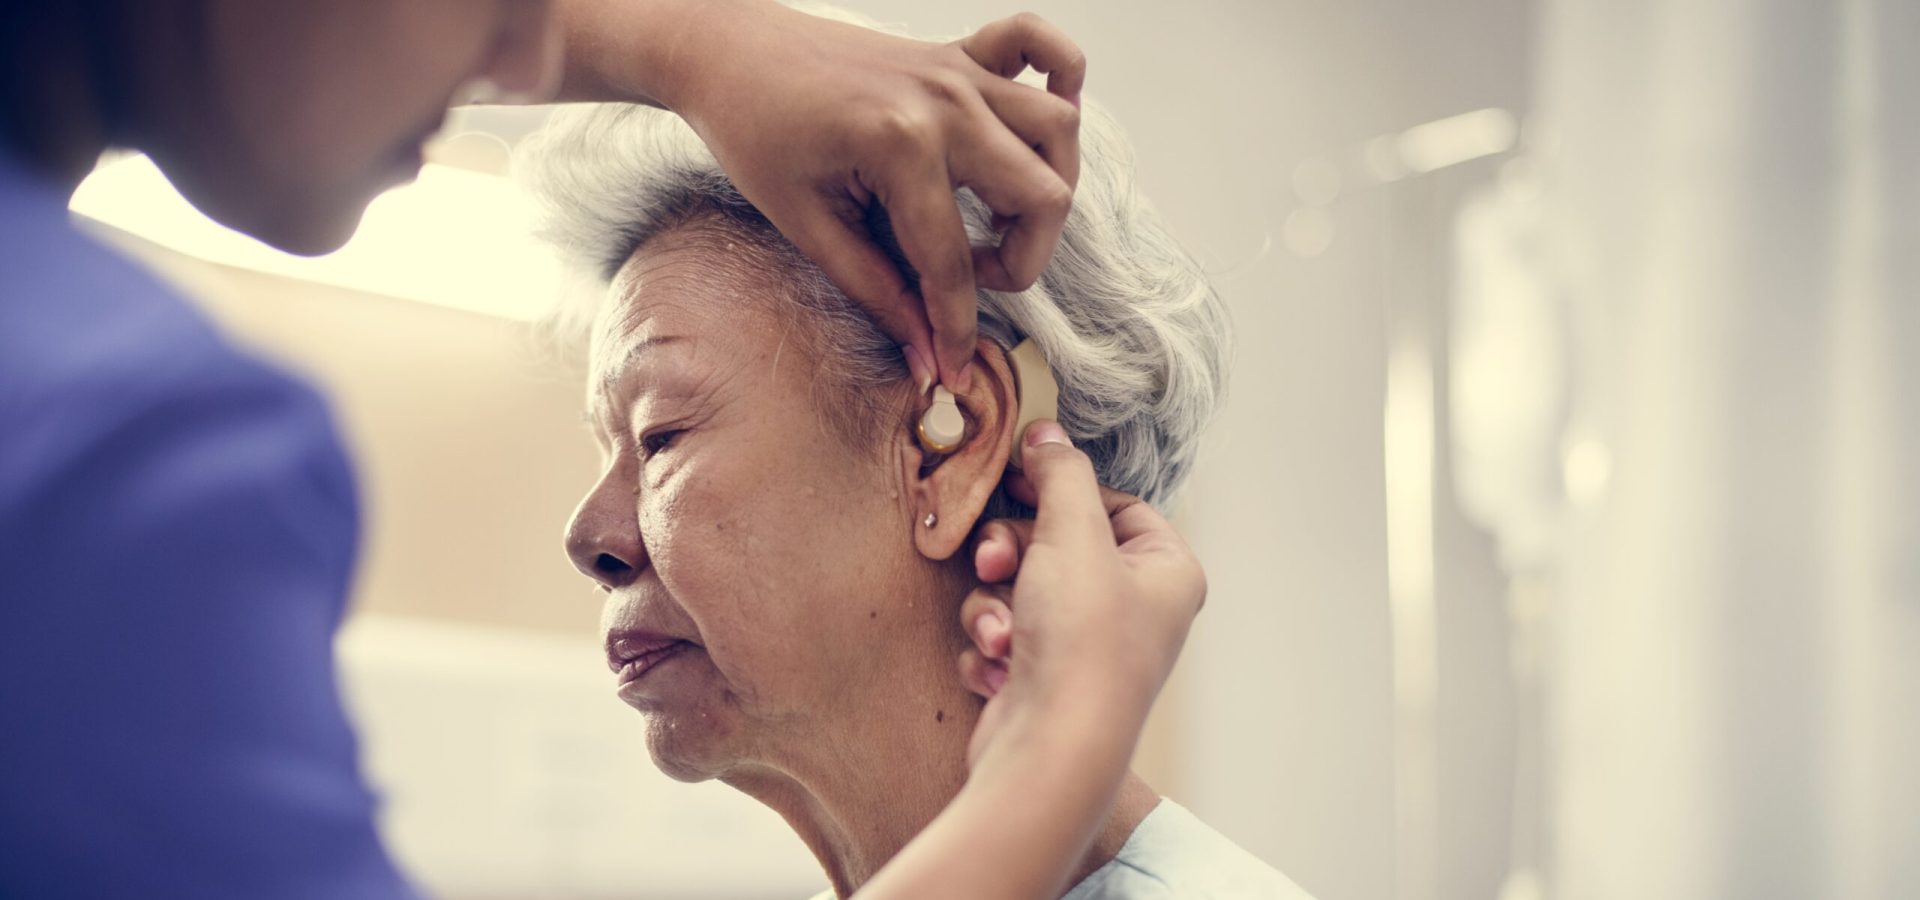 Hearing Aid Care